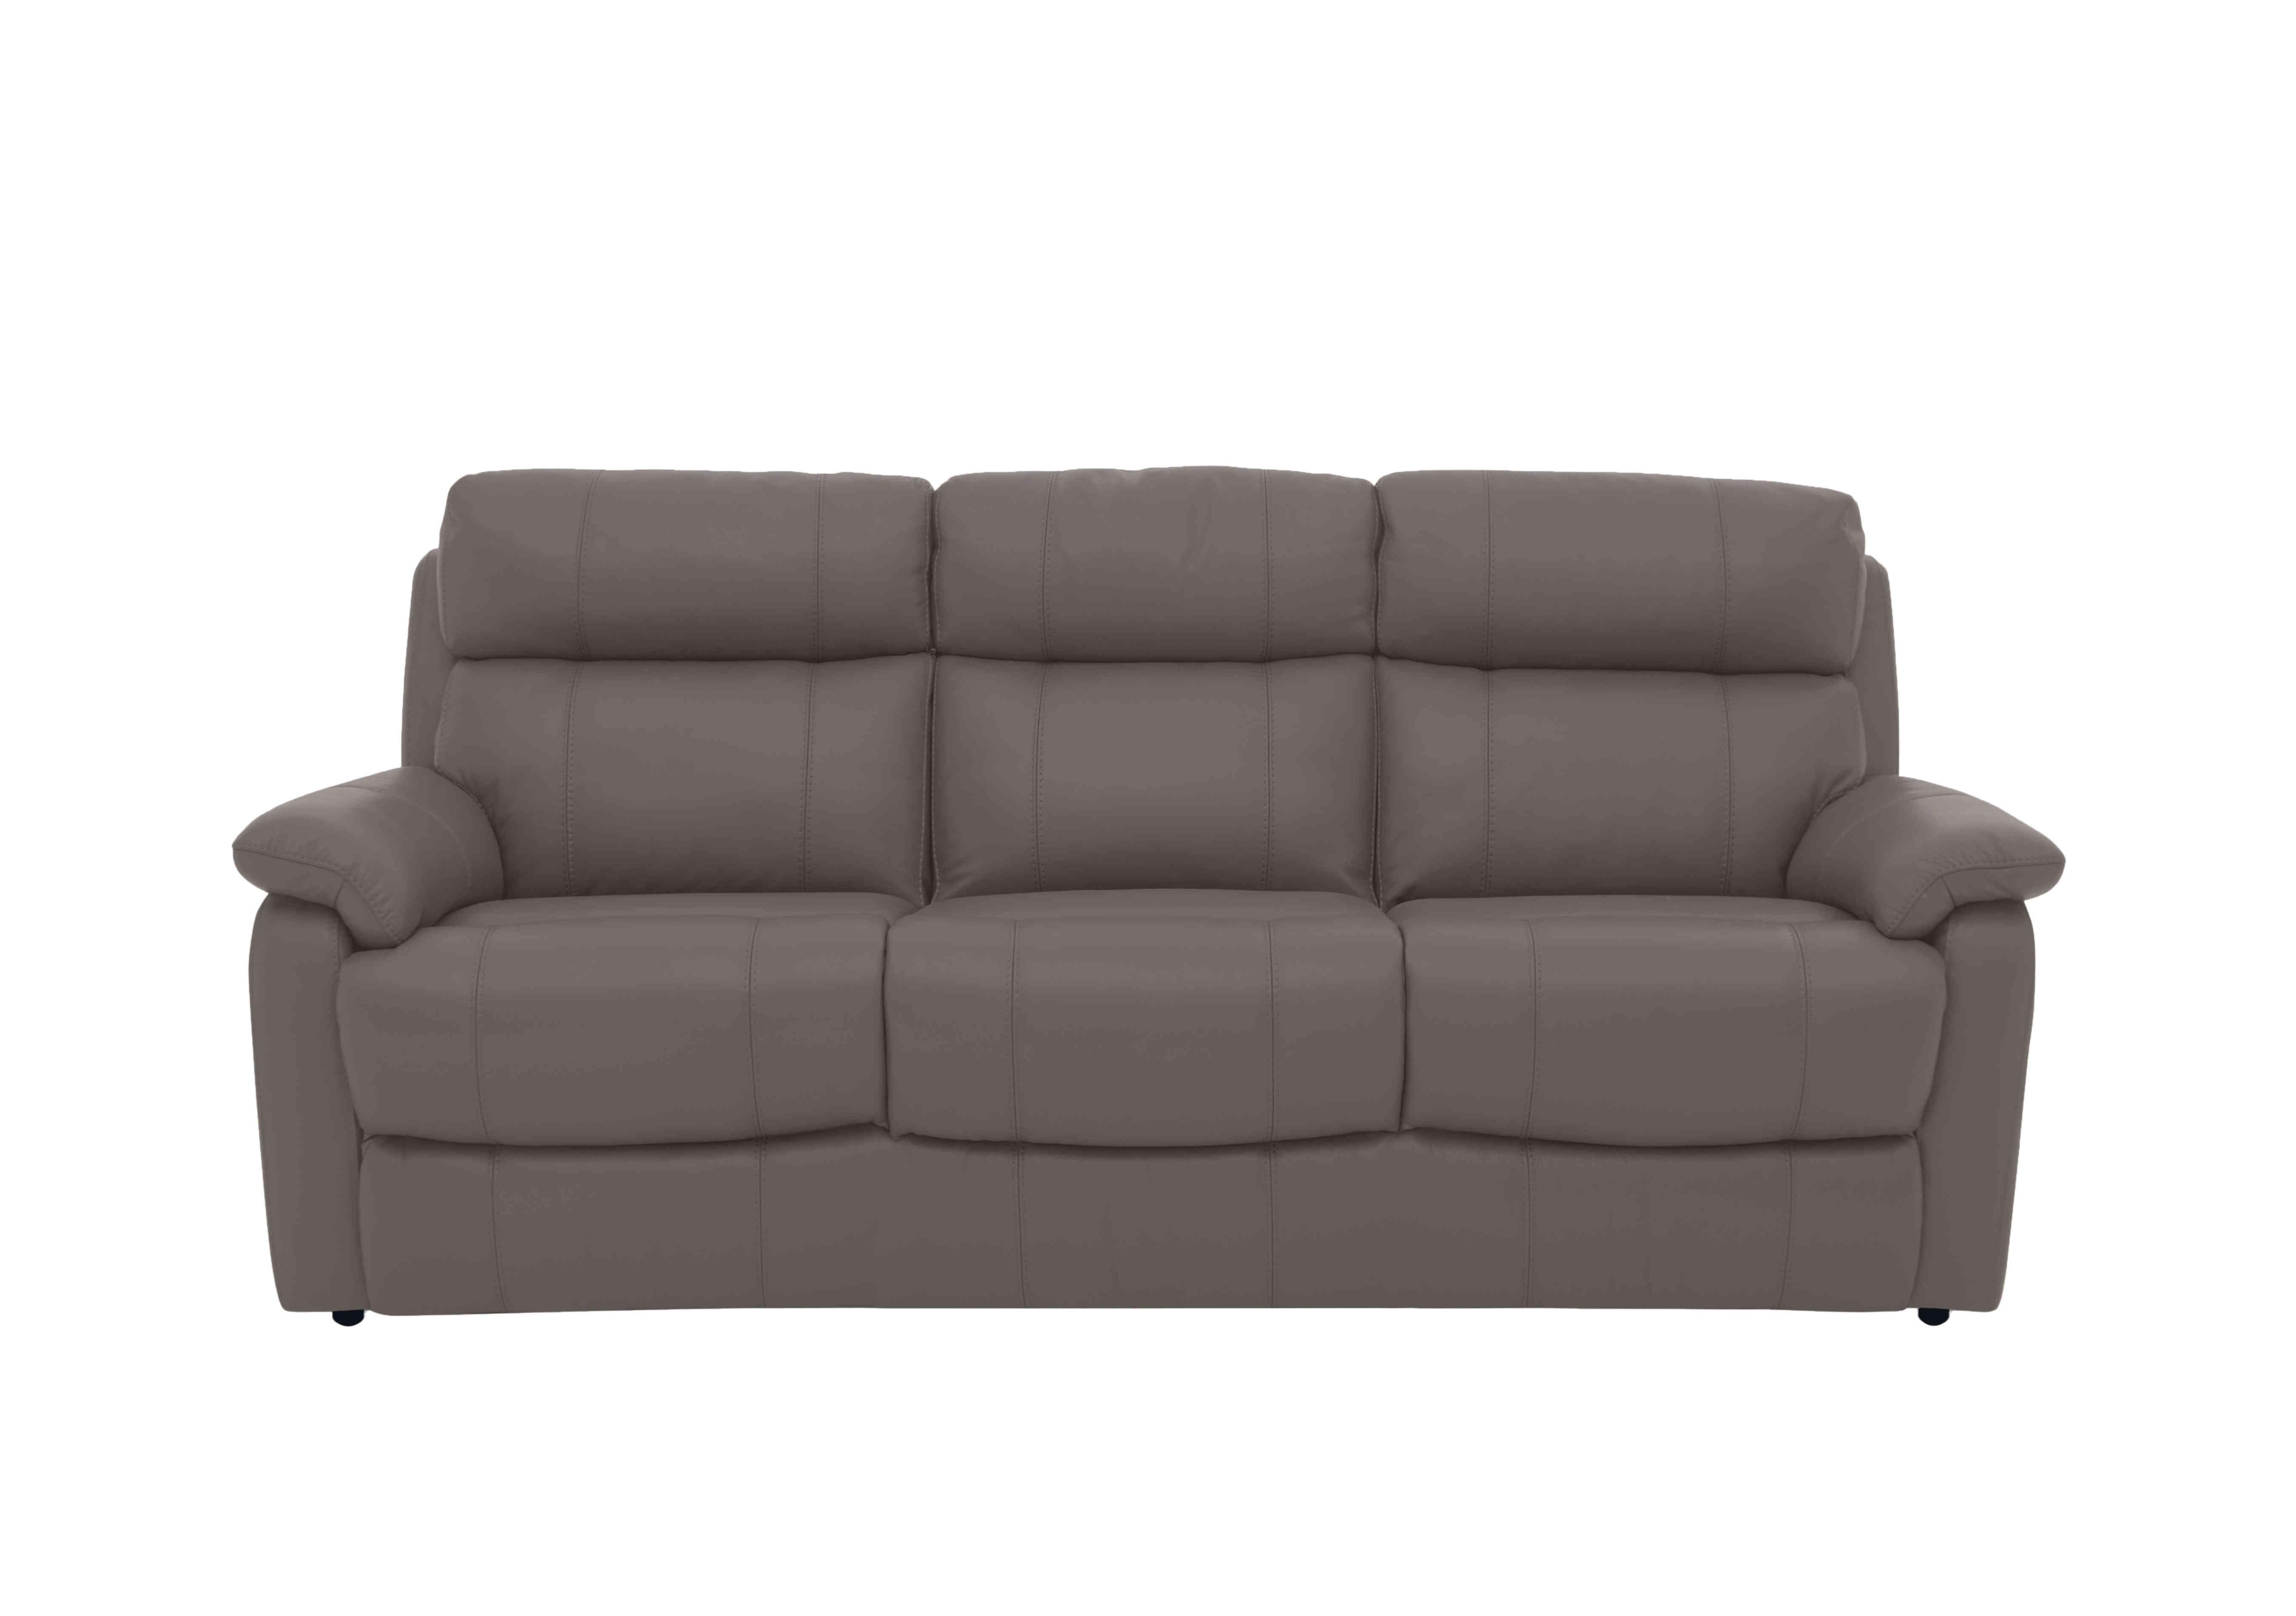 Relax Station Komodo 3 Seater Leather Sofa in Bv-042e Elephant on Furniture Village